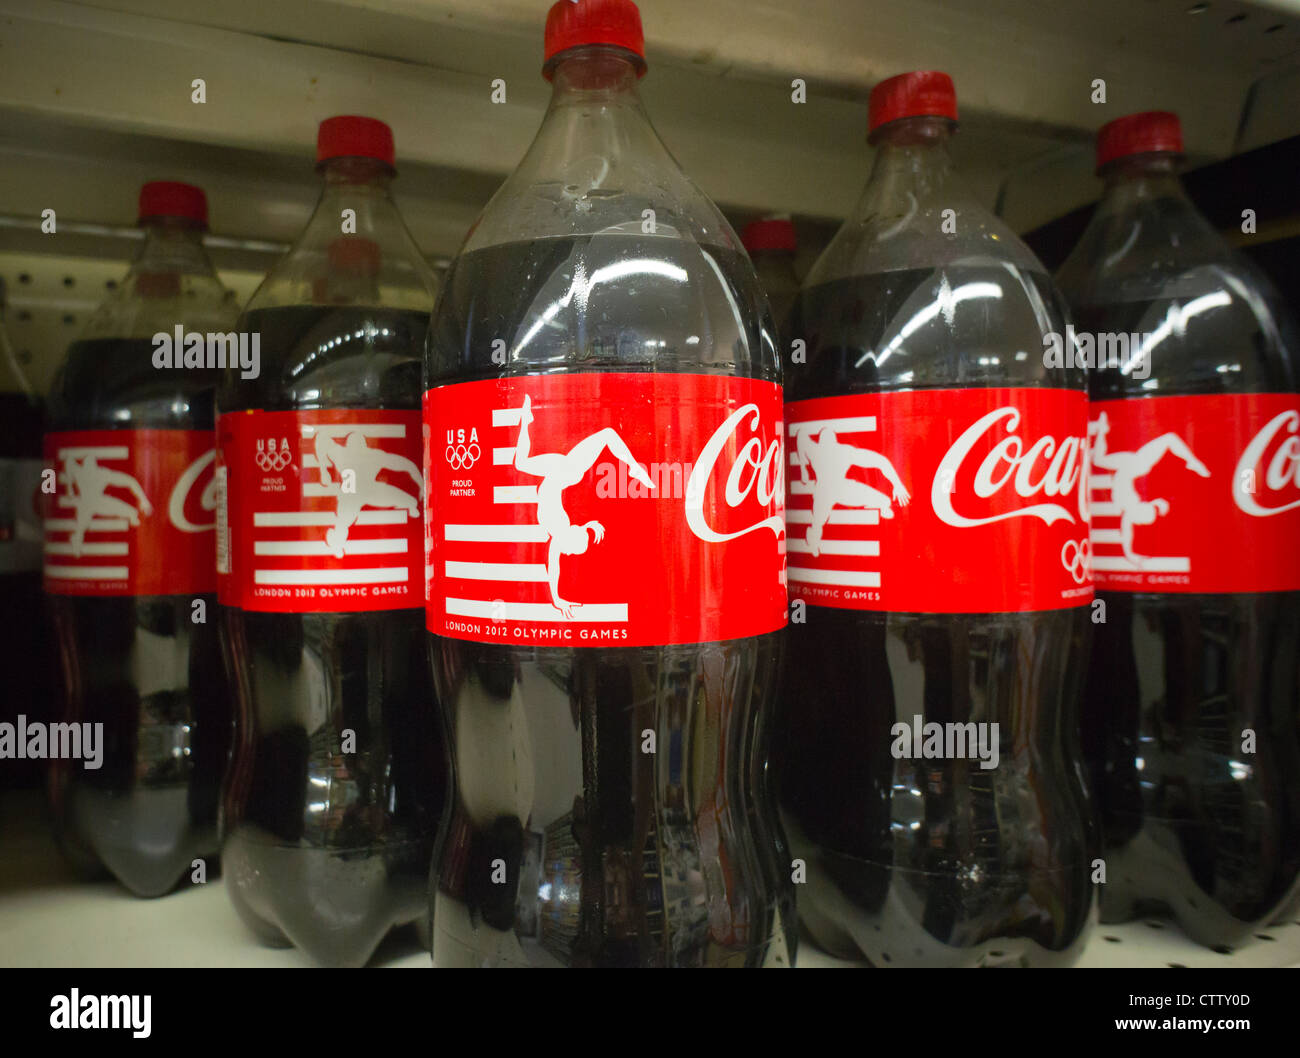 Coca-Cola bottles in a supermarket in New York promote their involvement with the London 2012 Olympics Stock Photo